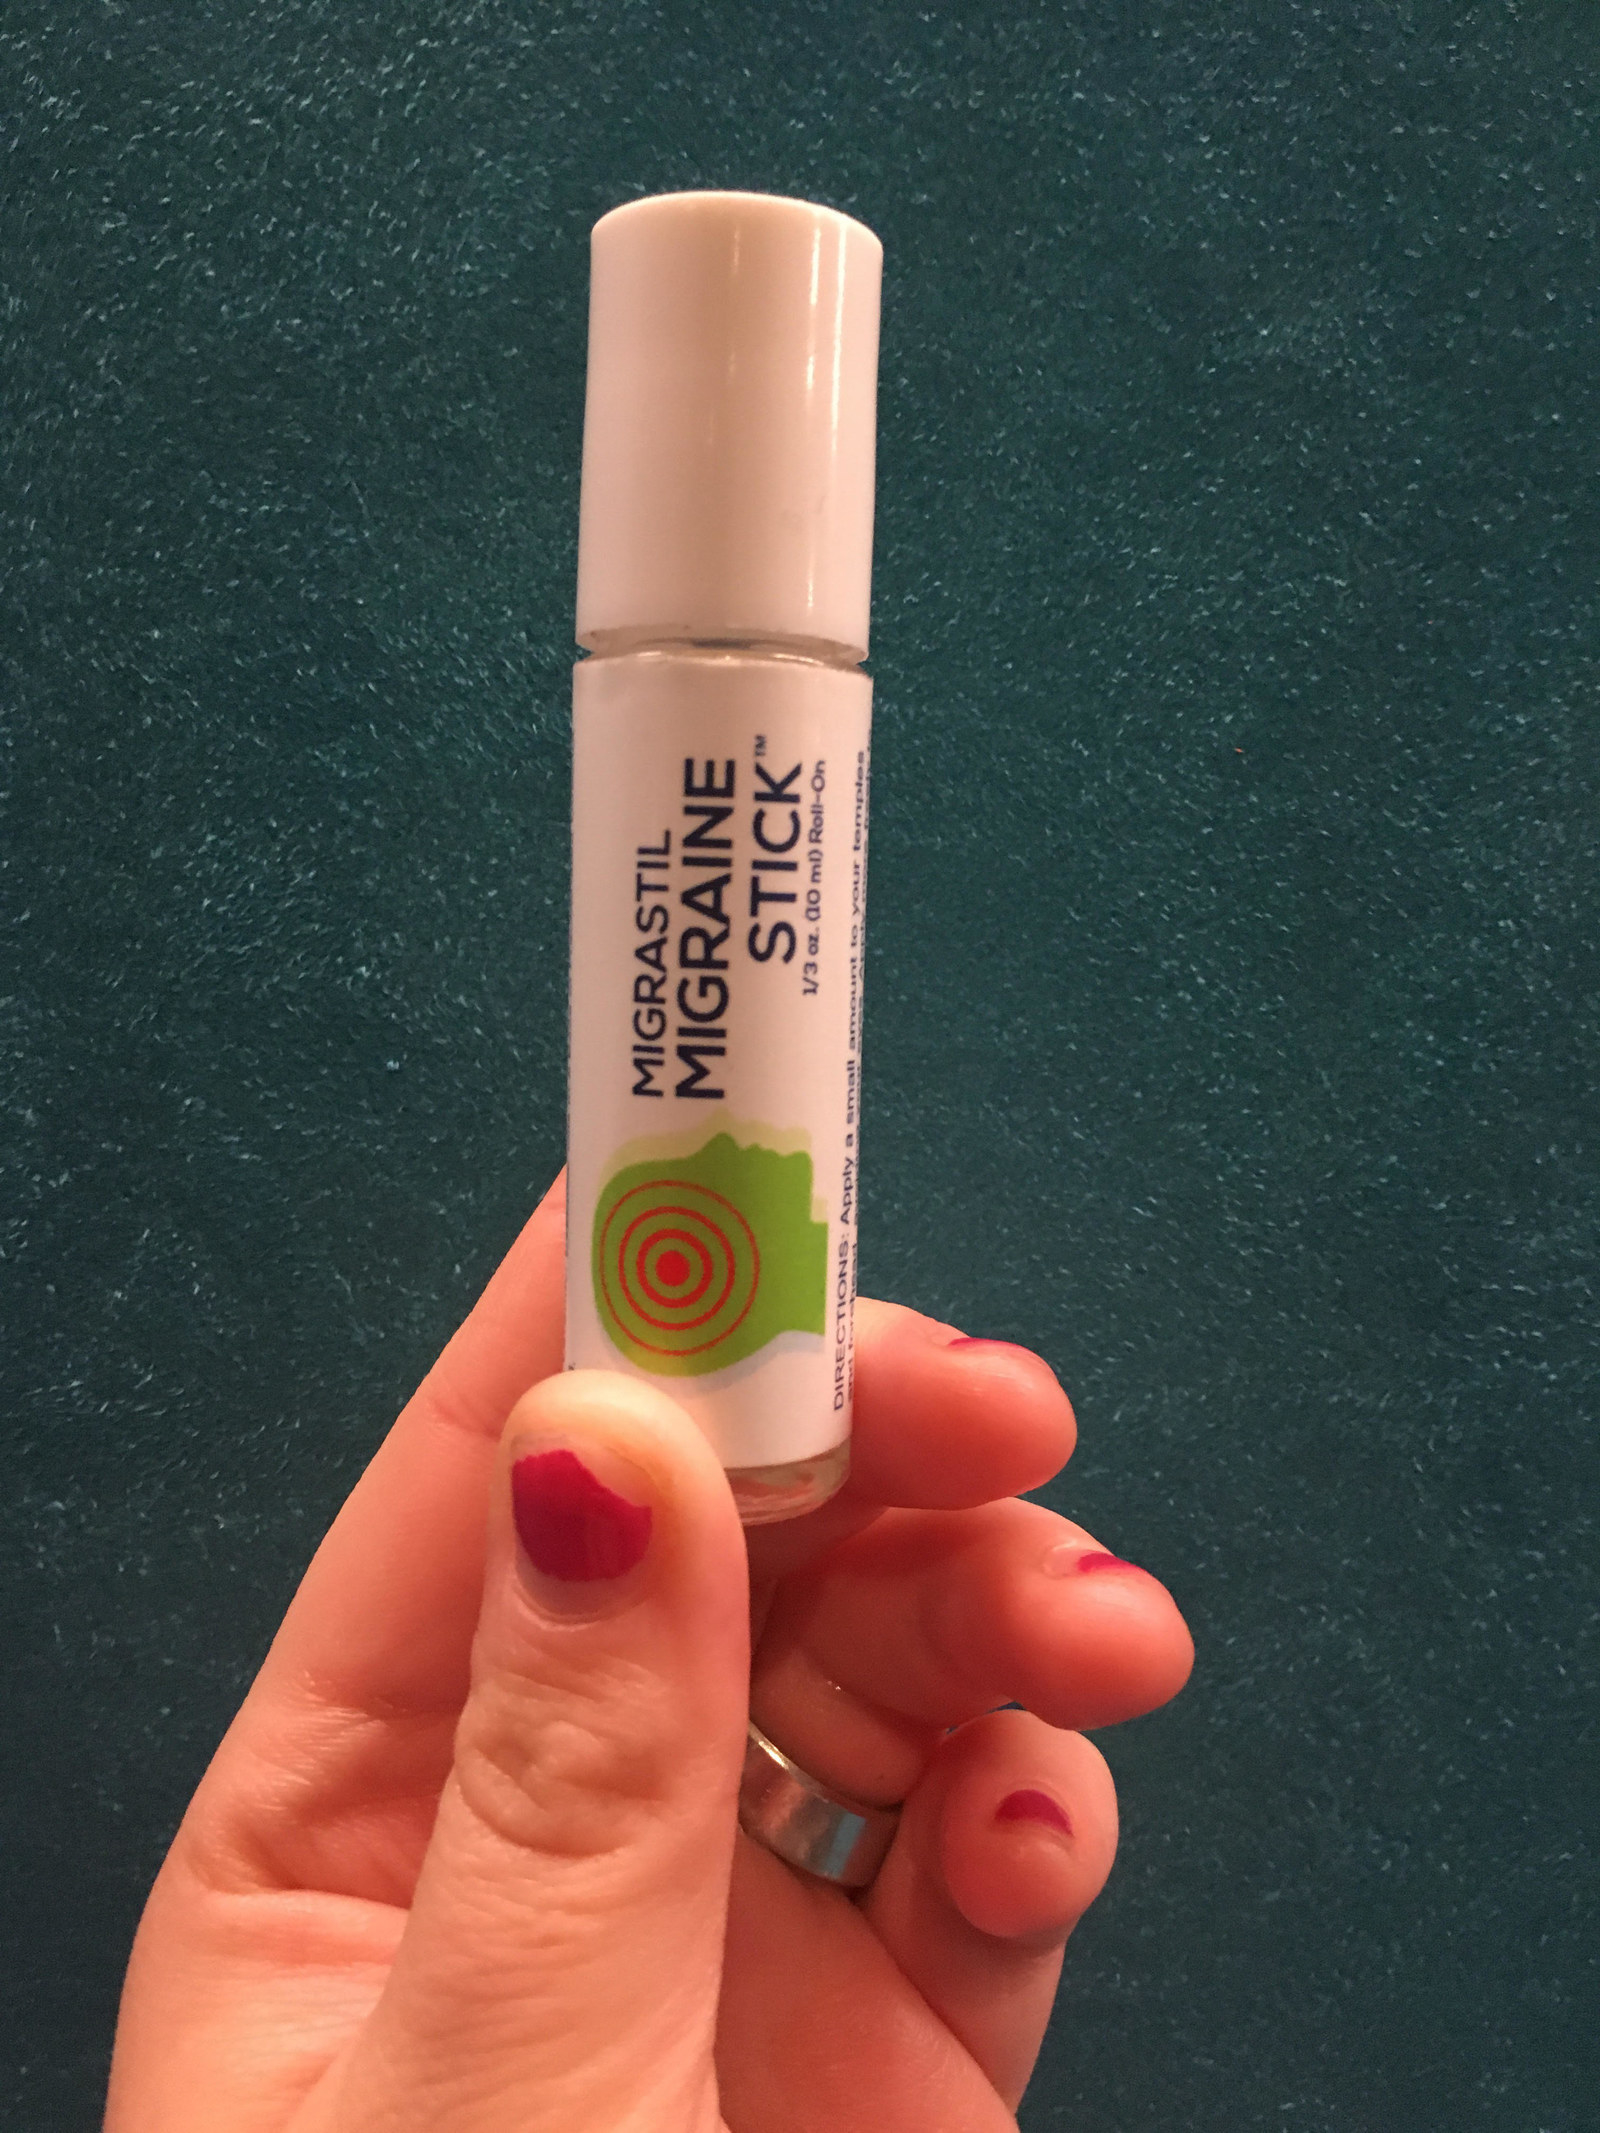 Photo taken by BuzzFeed editor Katy Herman showing the migraine stick, which is roughly the size of a lip balm